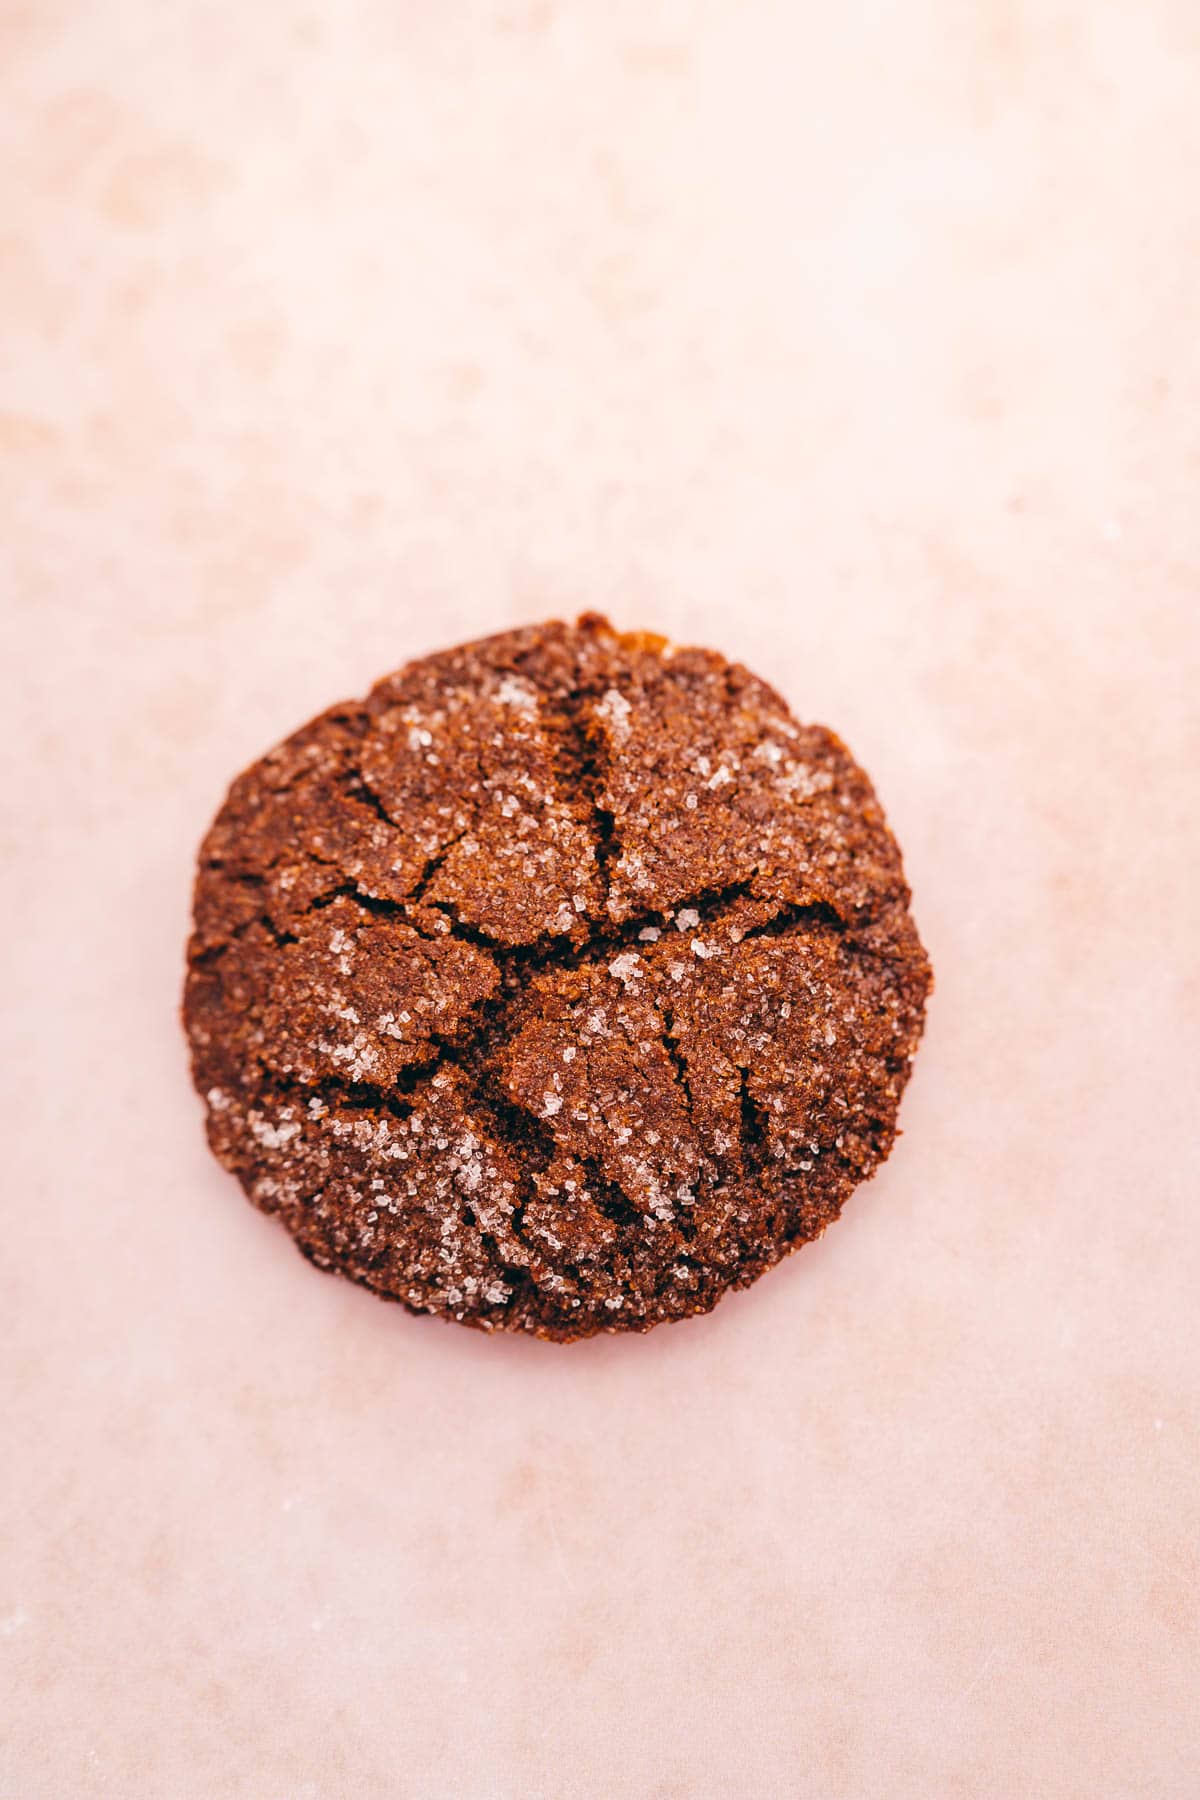 A gluten-free cookie is sitting on top of a pink surface.